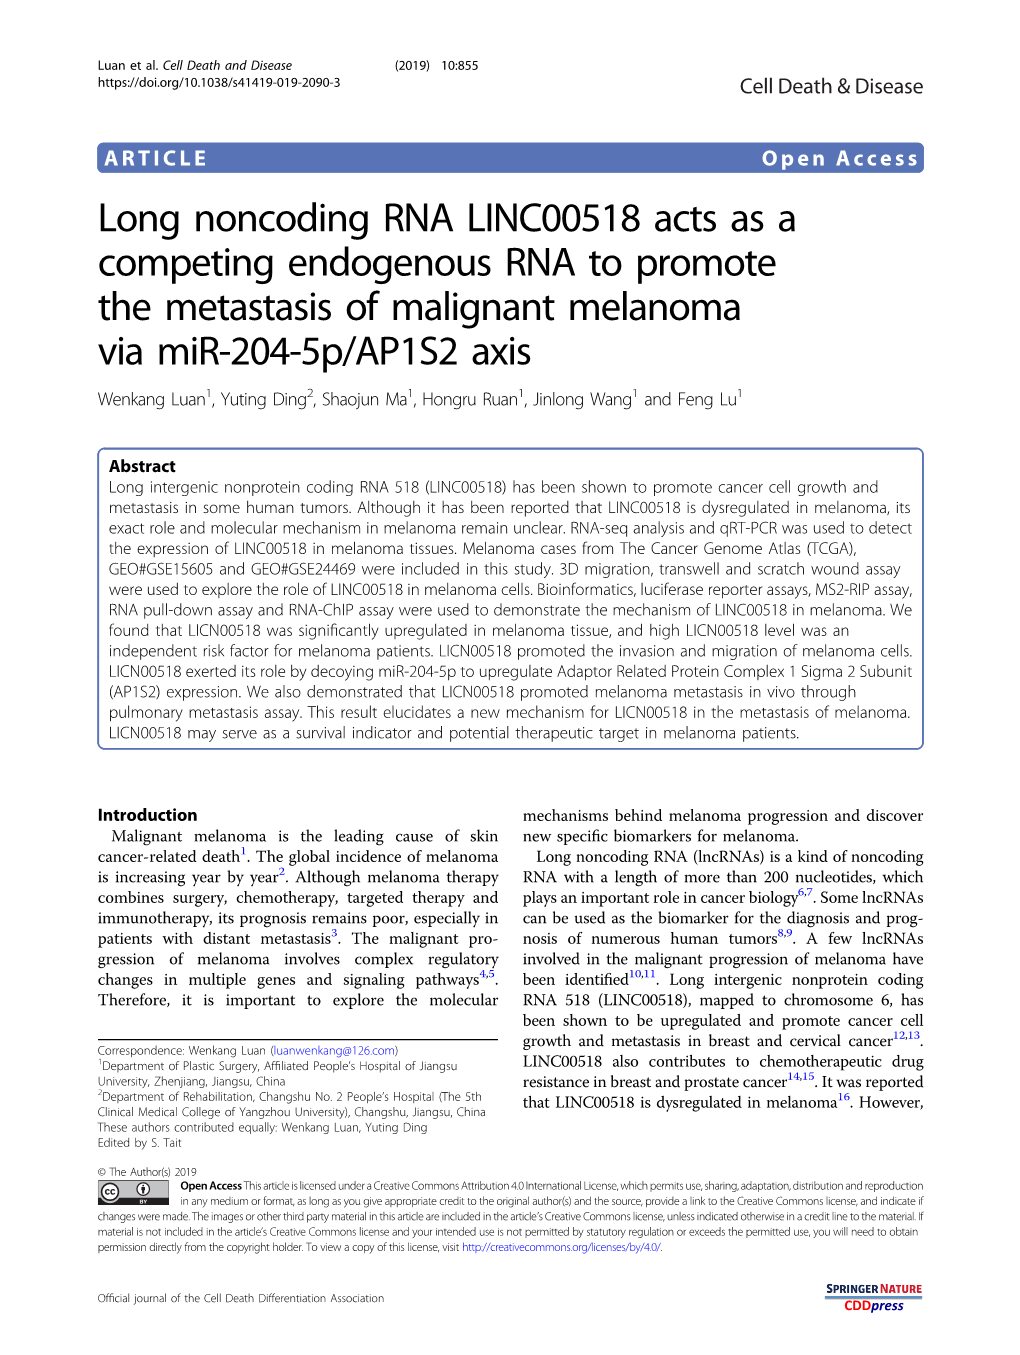 Long Noncoding RNA LINC00518 Acts As a Competing Endogenous RNA